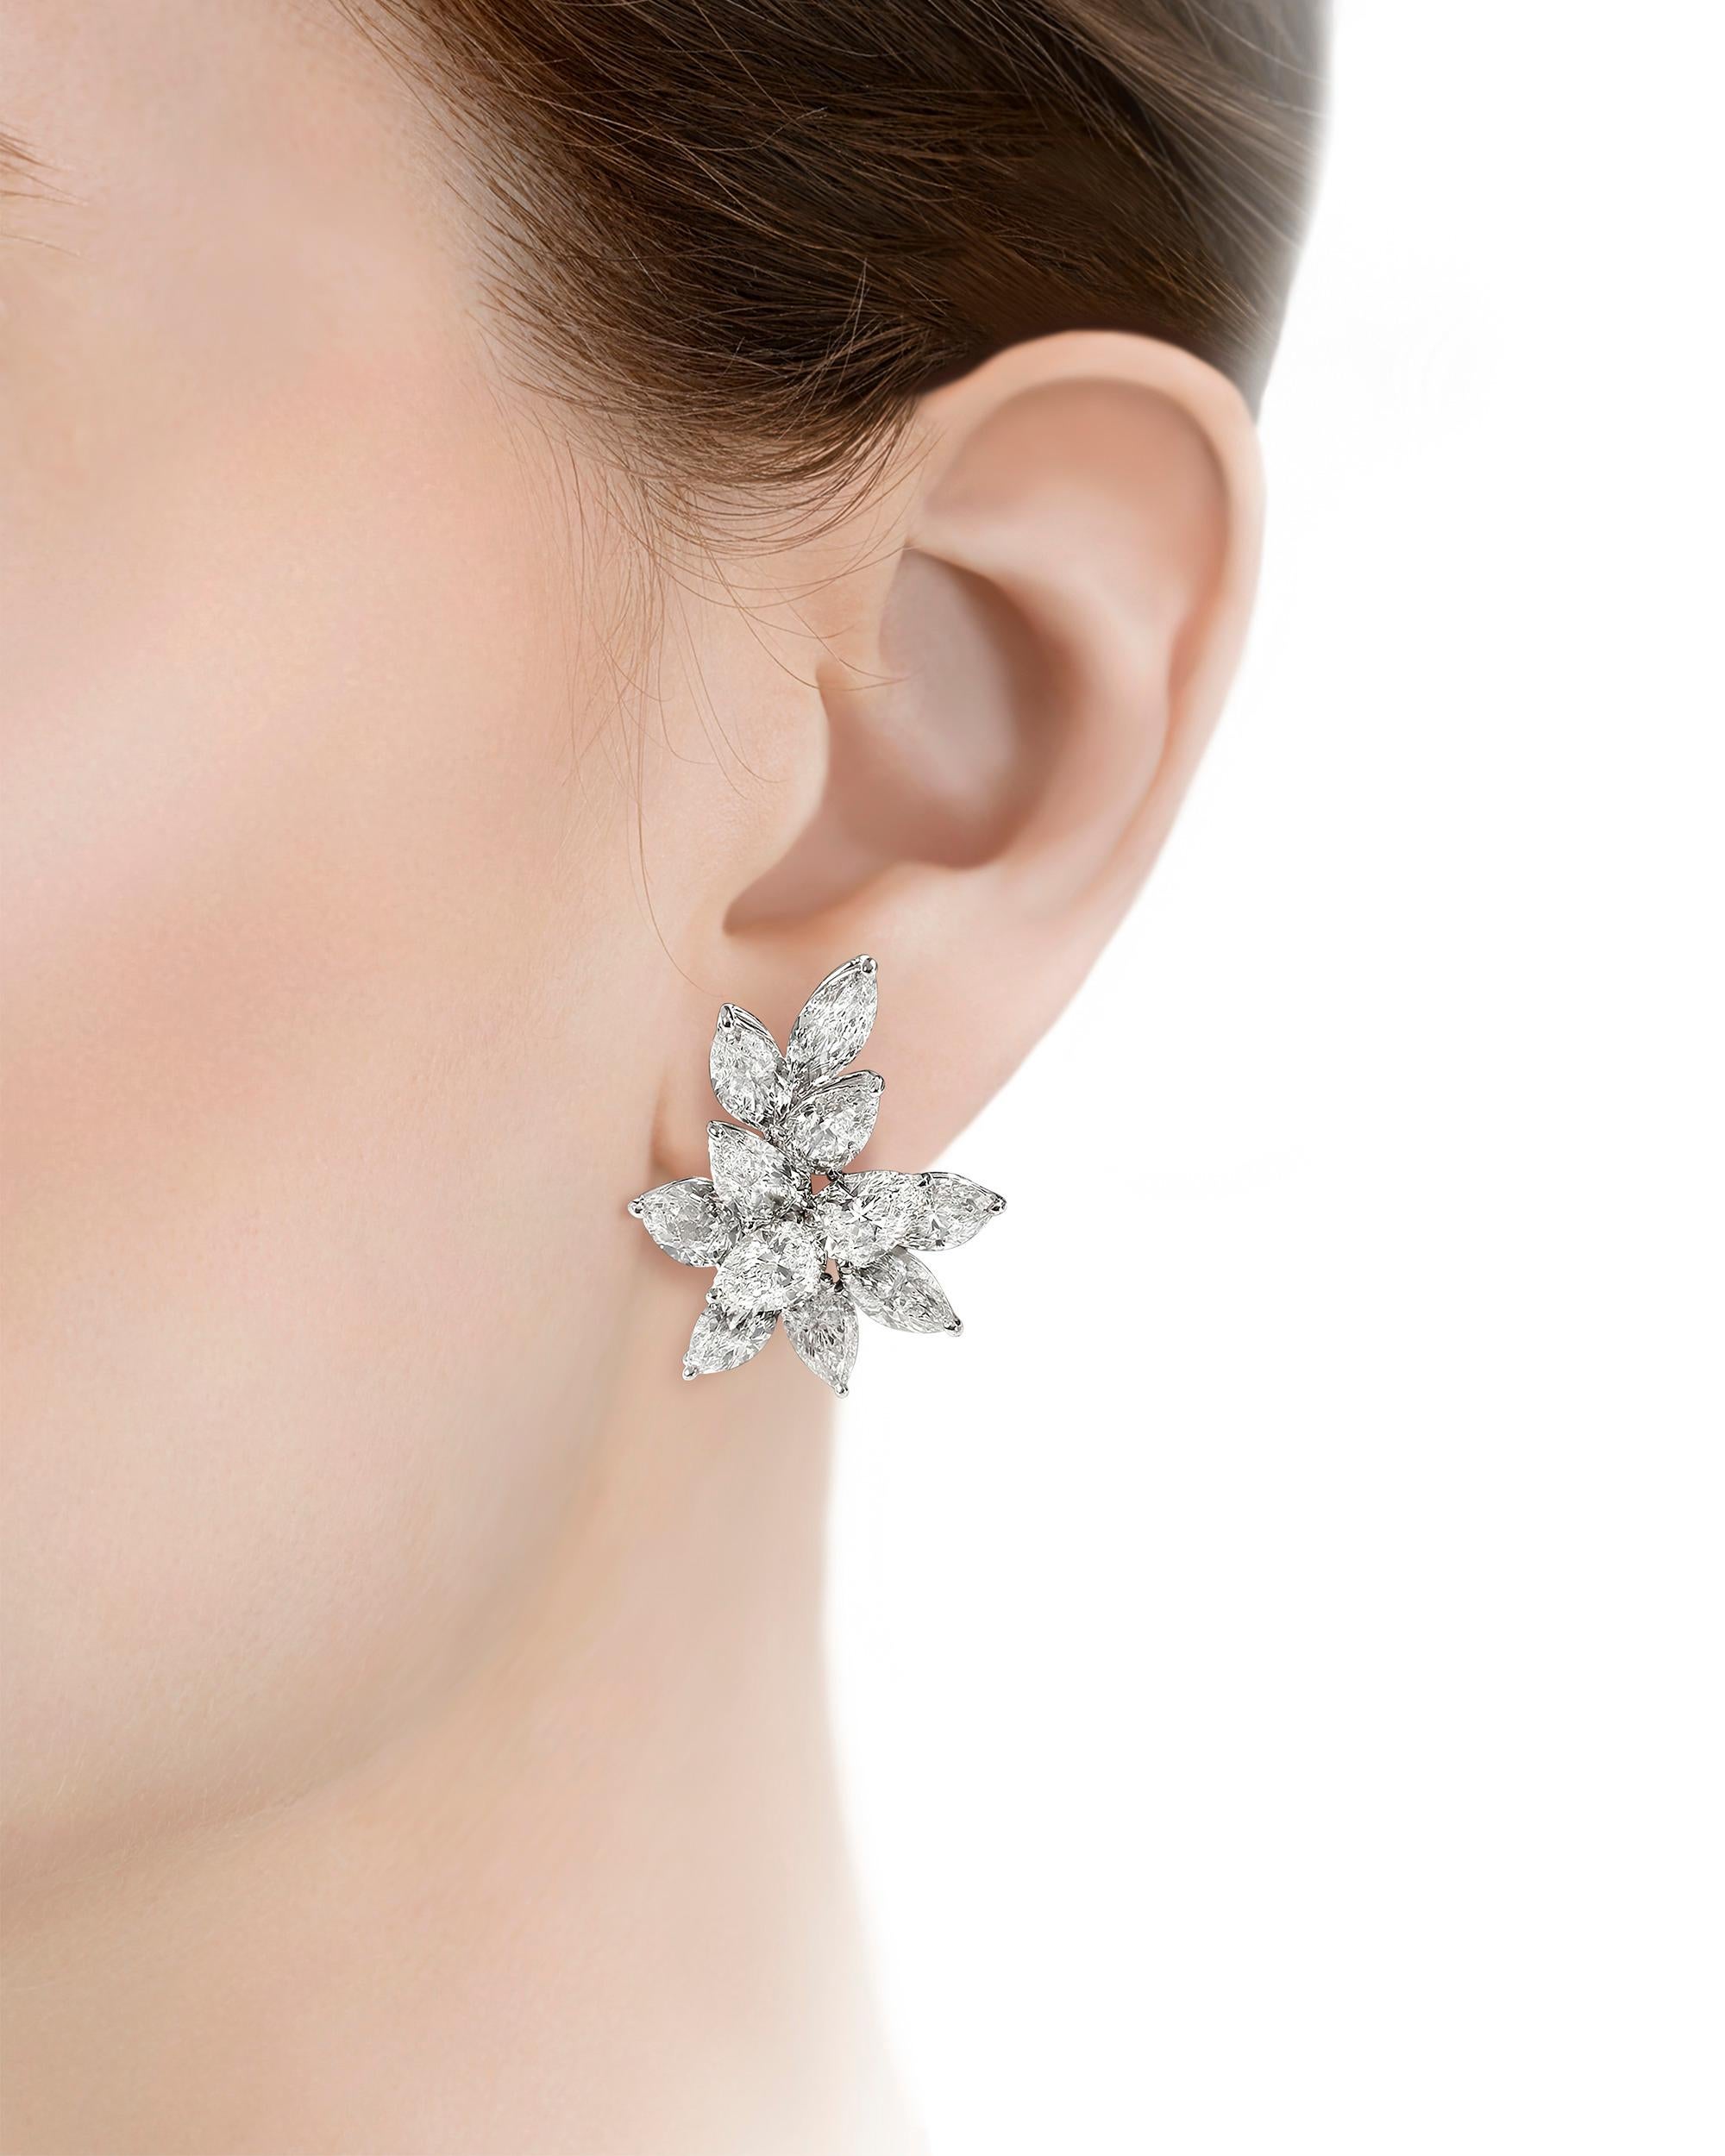 These magnificent diamond cluster earrings are a burst of luminosity. Weighing an impressive 22.99 carats, these 22 marquise and pear-cut stones are perfectly matched and have been certified by the GIA as having D through G color. Set in platinum,